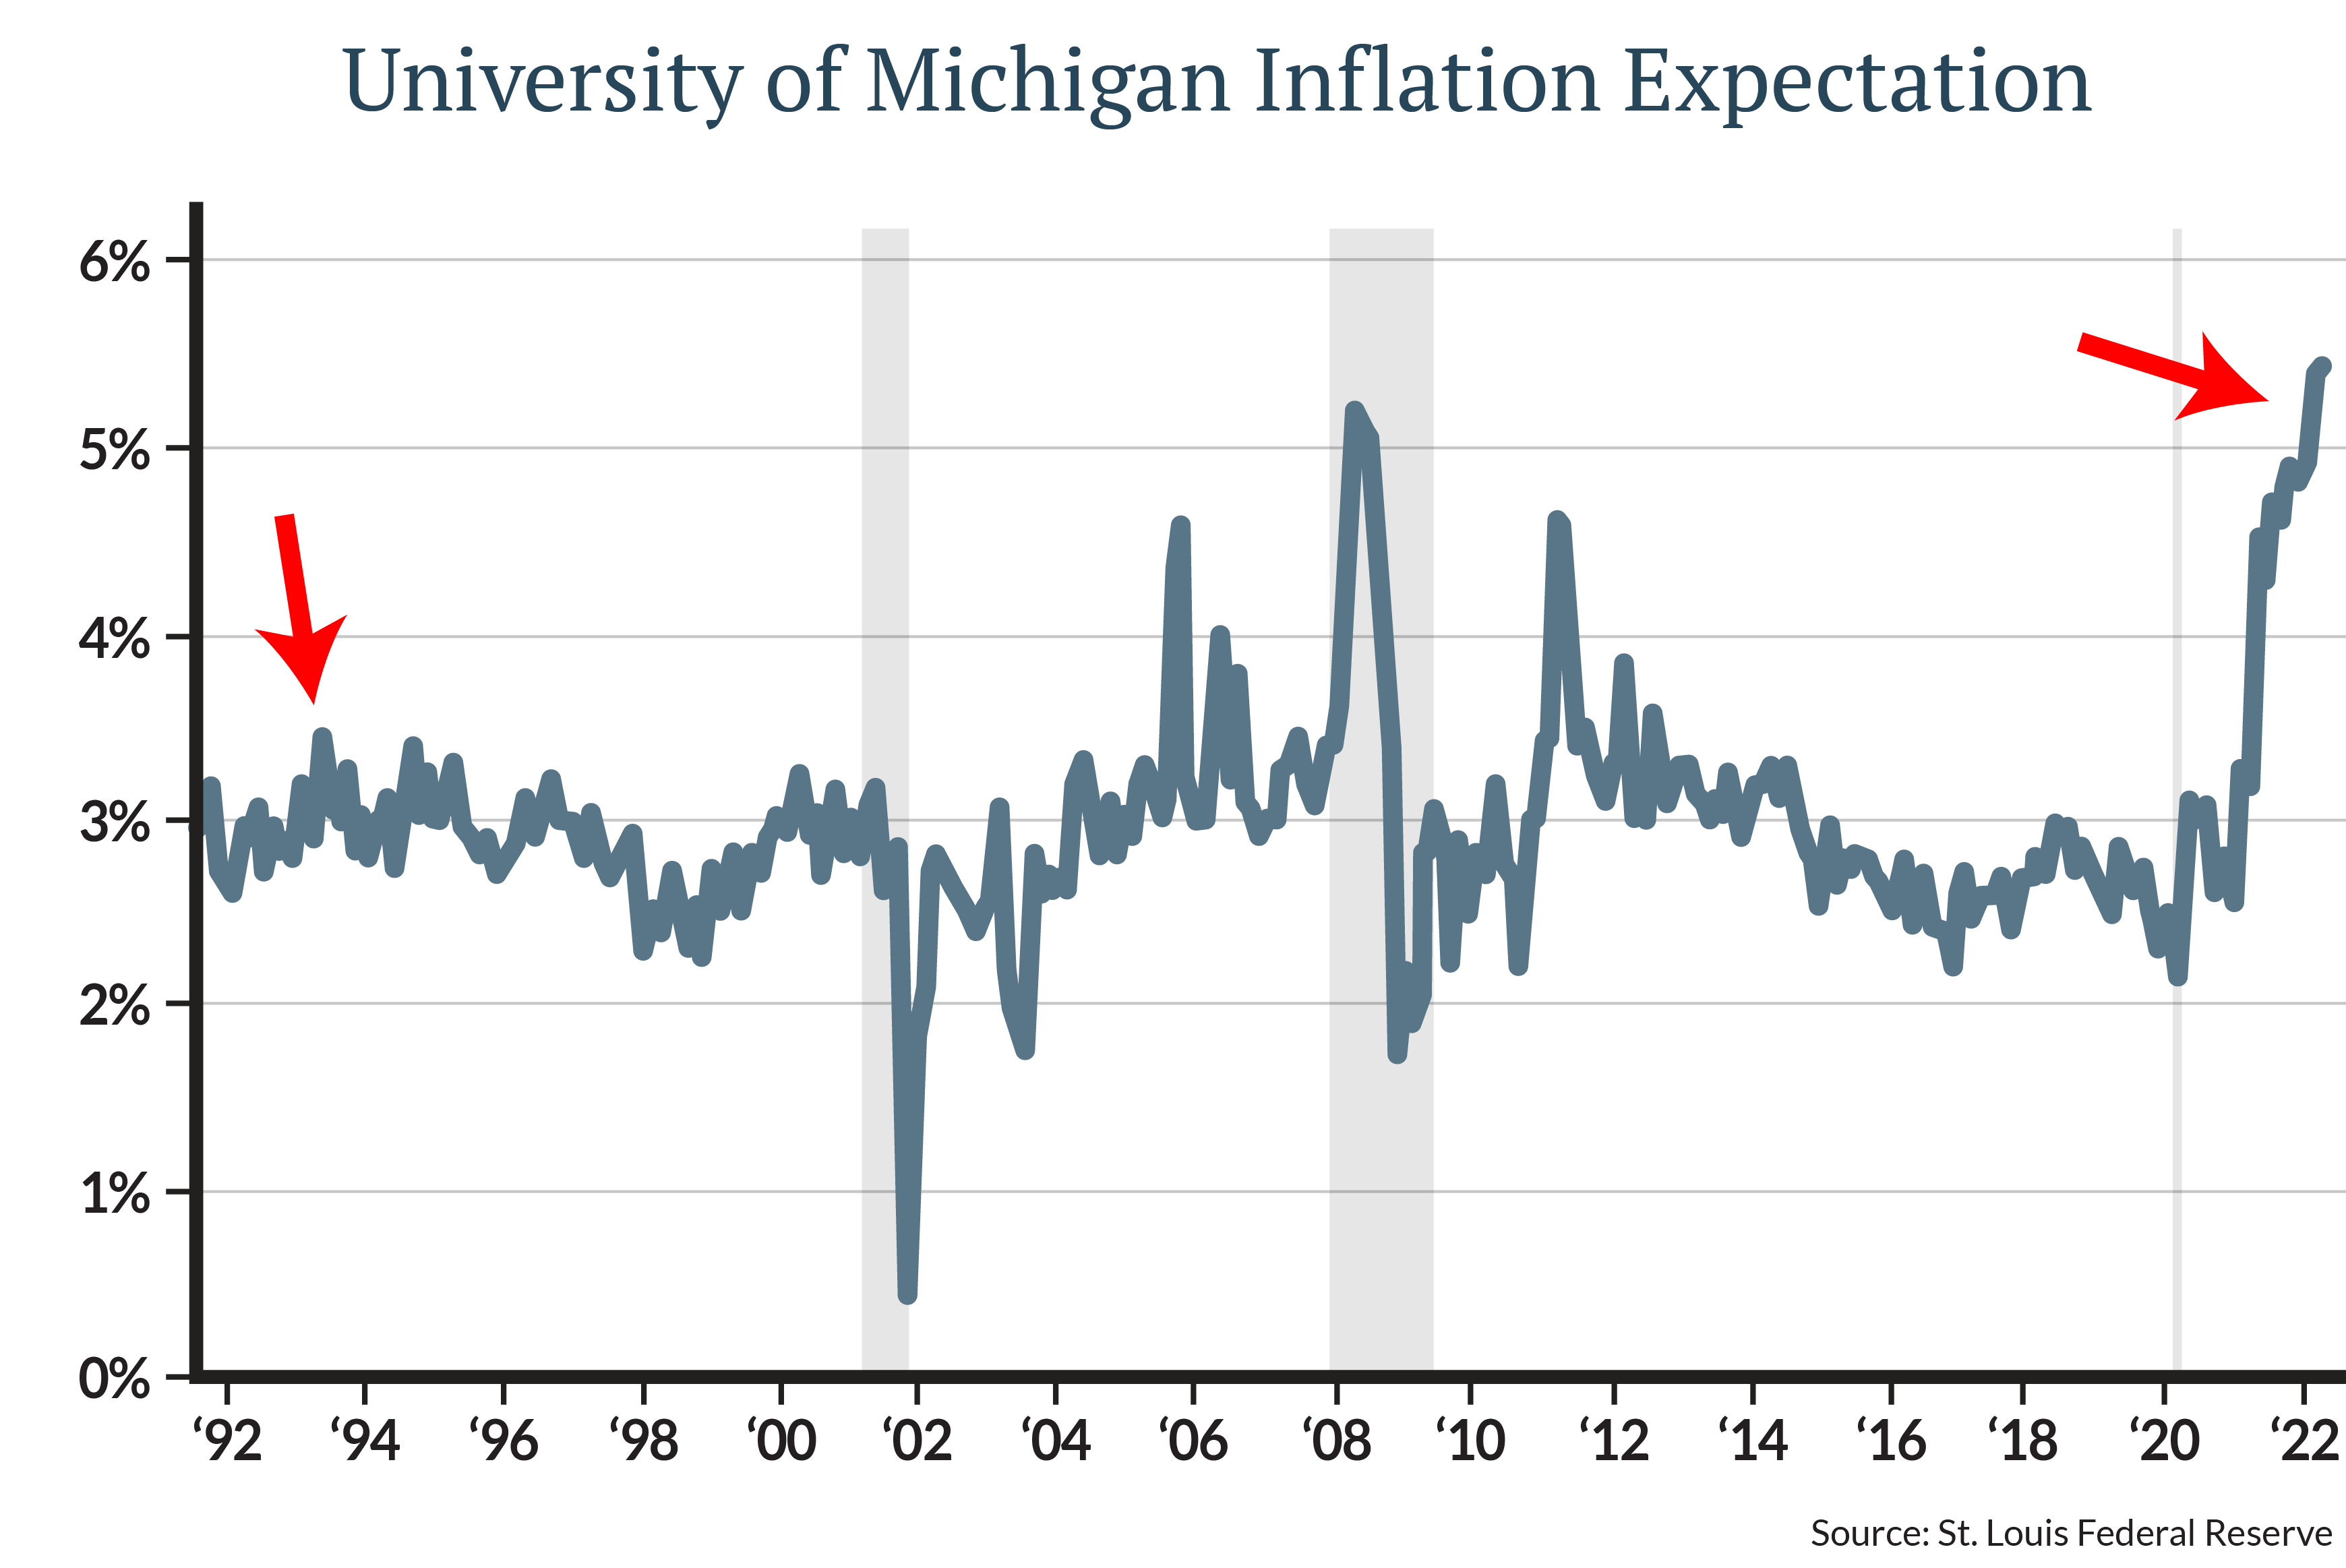 You can see in the chart that those 1994 and 1995 interest rate hikes took place when expectations didn’t change much. Contrast that to the right-hand side of the U of M chart, showing that expectations have risen from near 2% to over 5%, with a big jump recorded last week before the Fed moved.